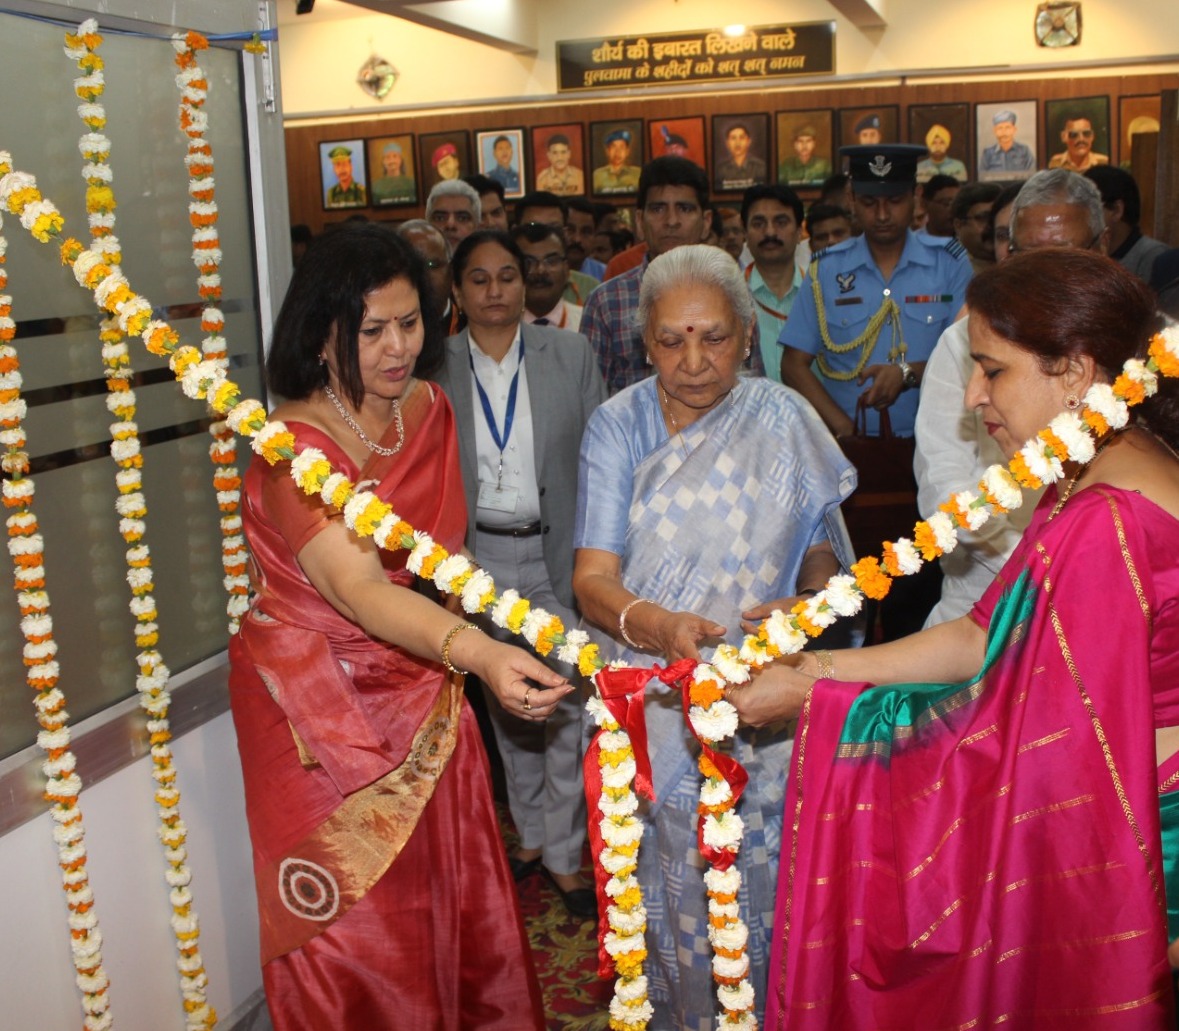 The Governor inaugurated the newly constructed Studio Incubation Center & Anandam-Chaitanyam Yoga Center, and visited the Art Exhibition at Chaudhary Charan Singh University, Meerut.